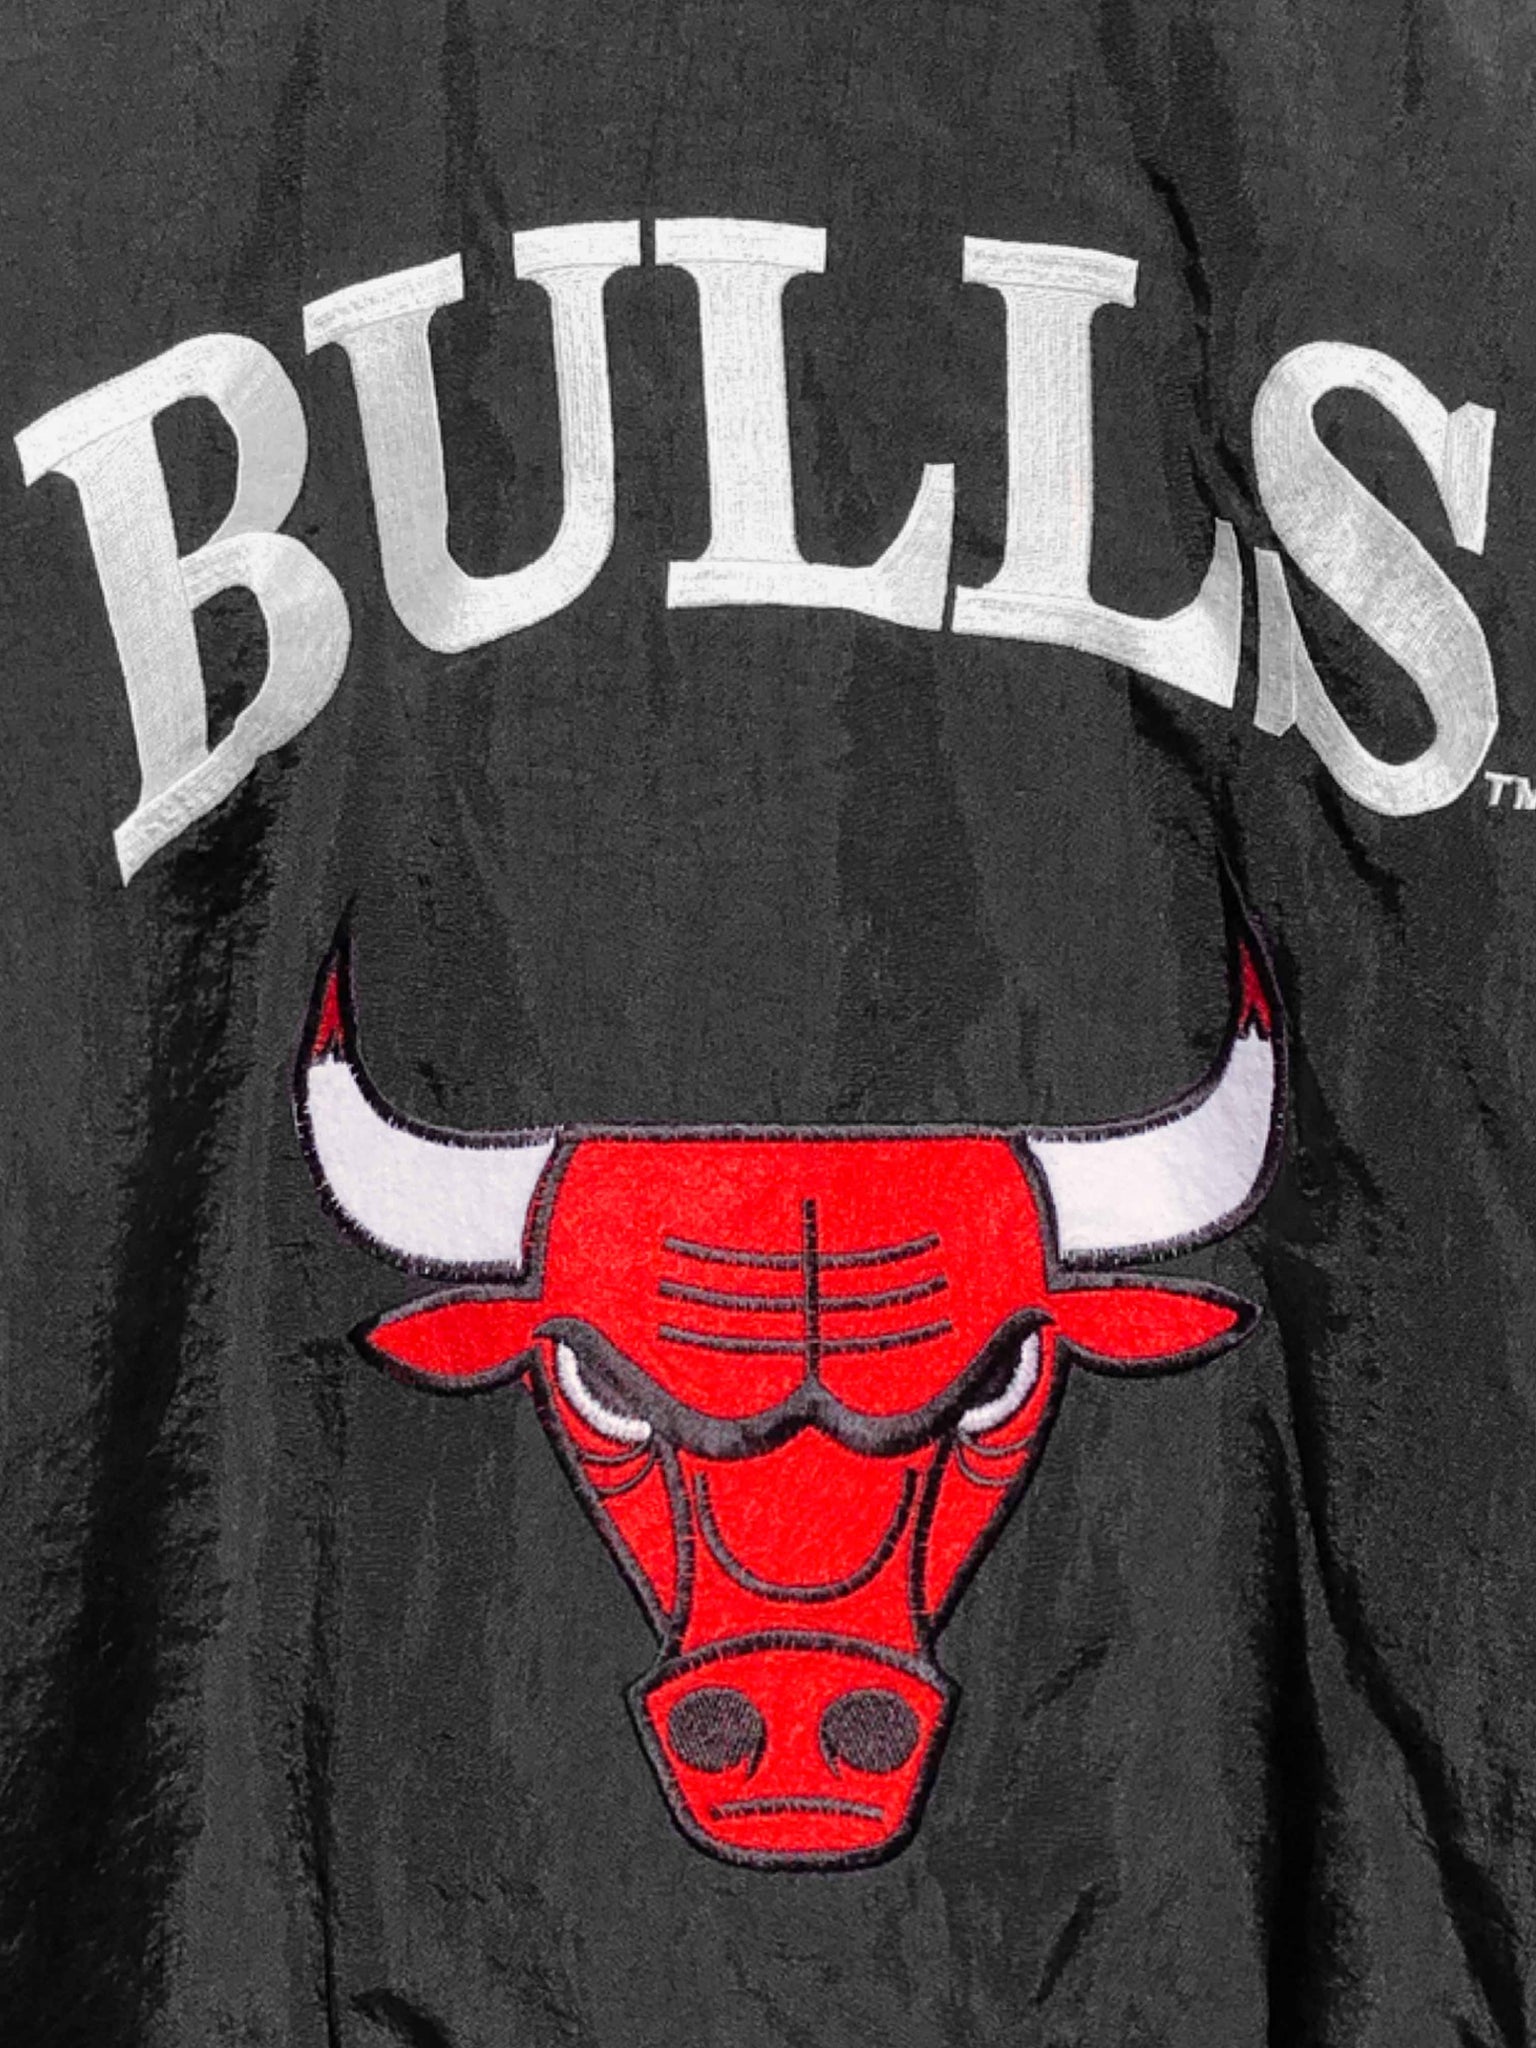 Chicago Bulls Black and Red Jacket